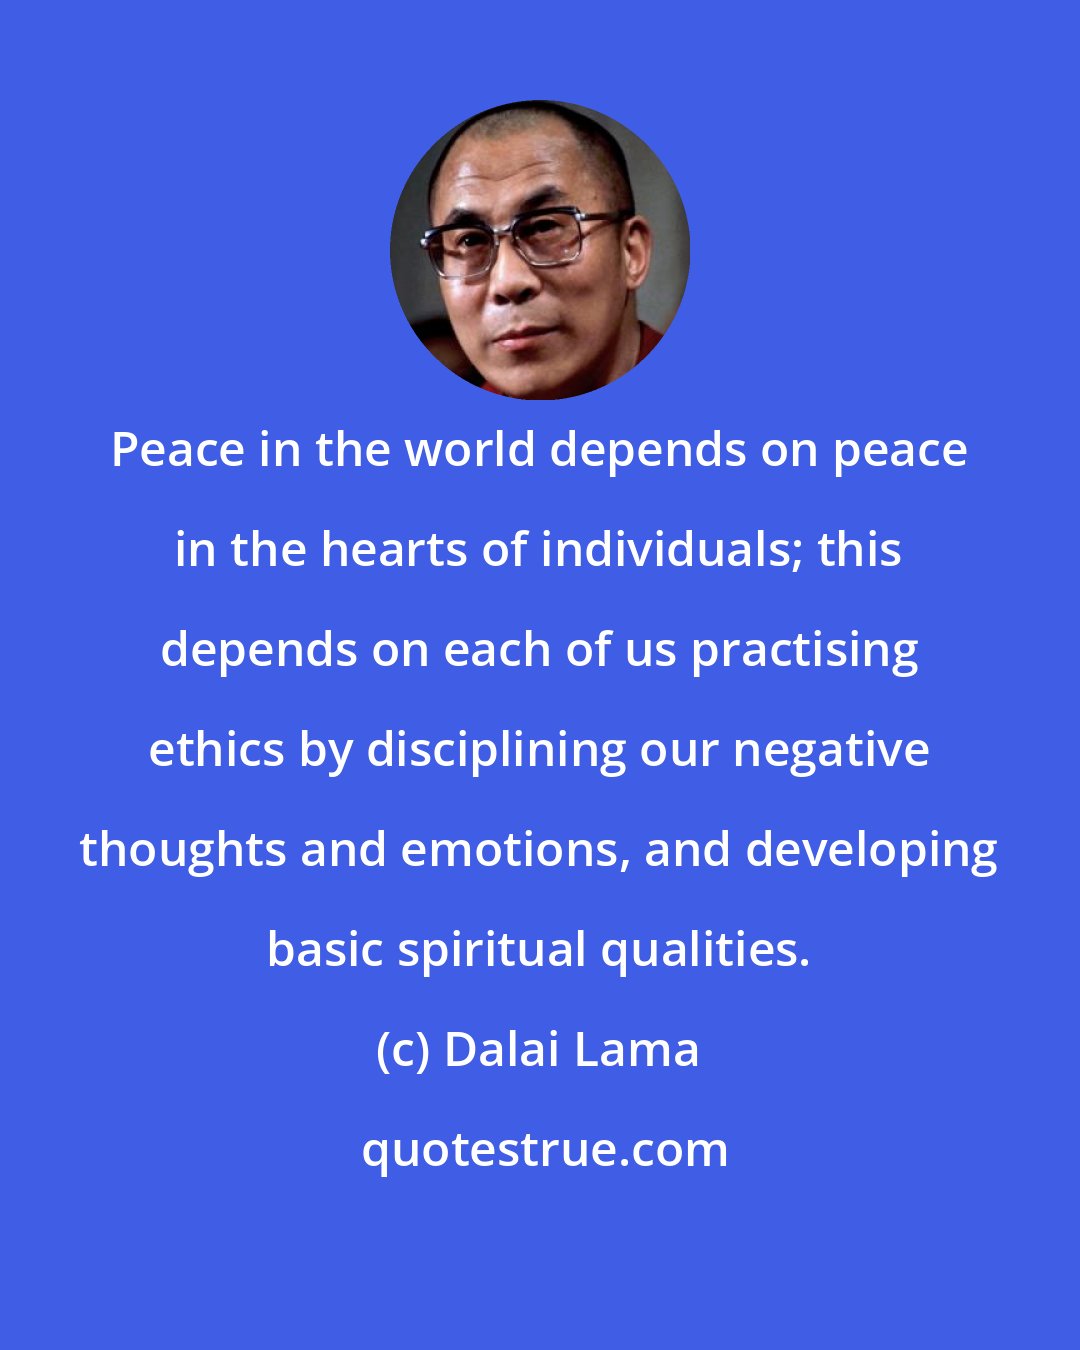 Dalai Lama: Peace in the world depends on peace in the hearts of individuals; this depends on each of us practising ethics by disciplining our negative thoughts and emotions, and developing basic spiritual qualities.